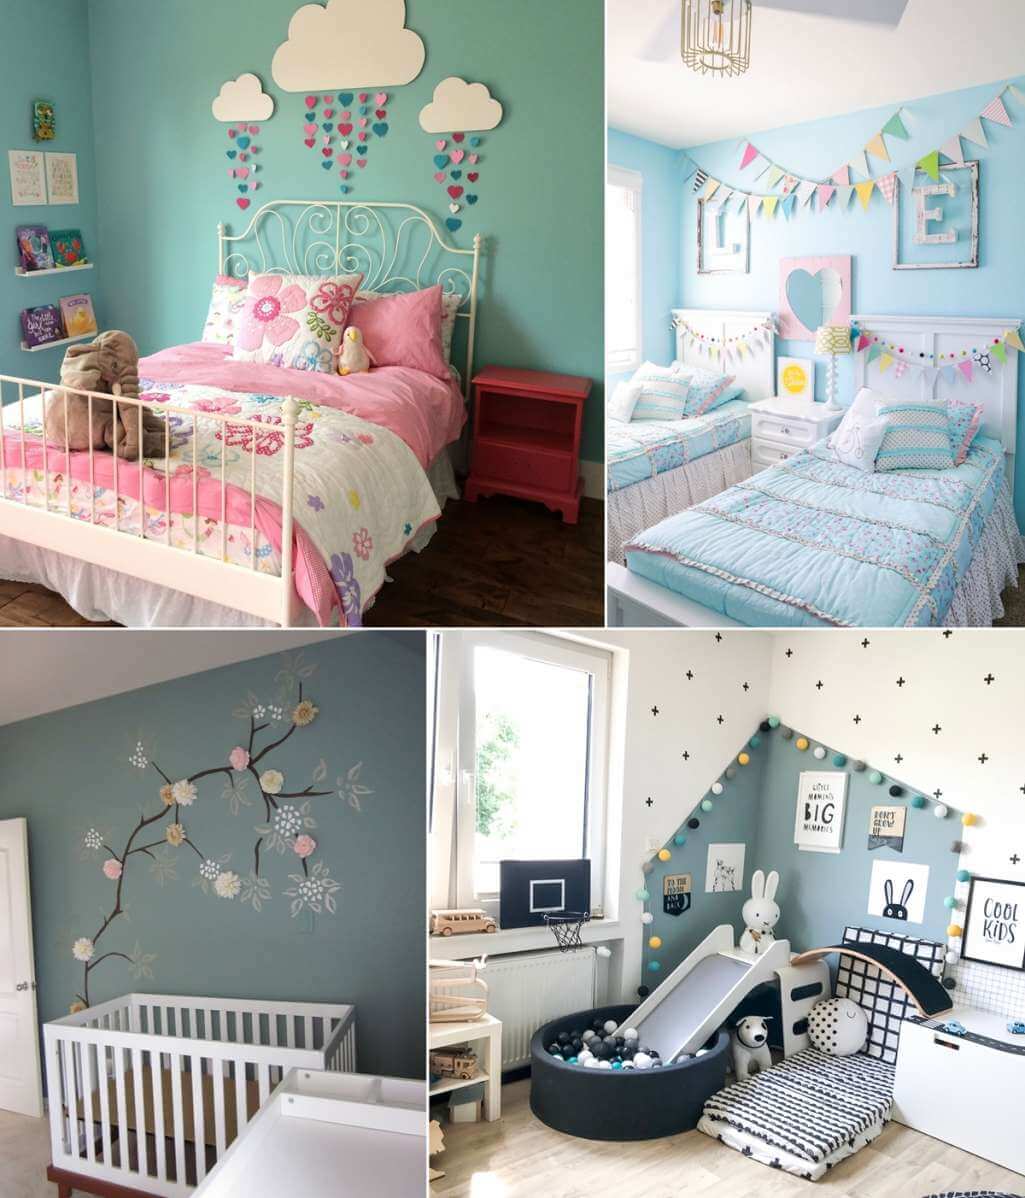 Creative Childrens Bedroom Ideas Pictures with Simple Decor